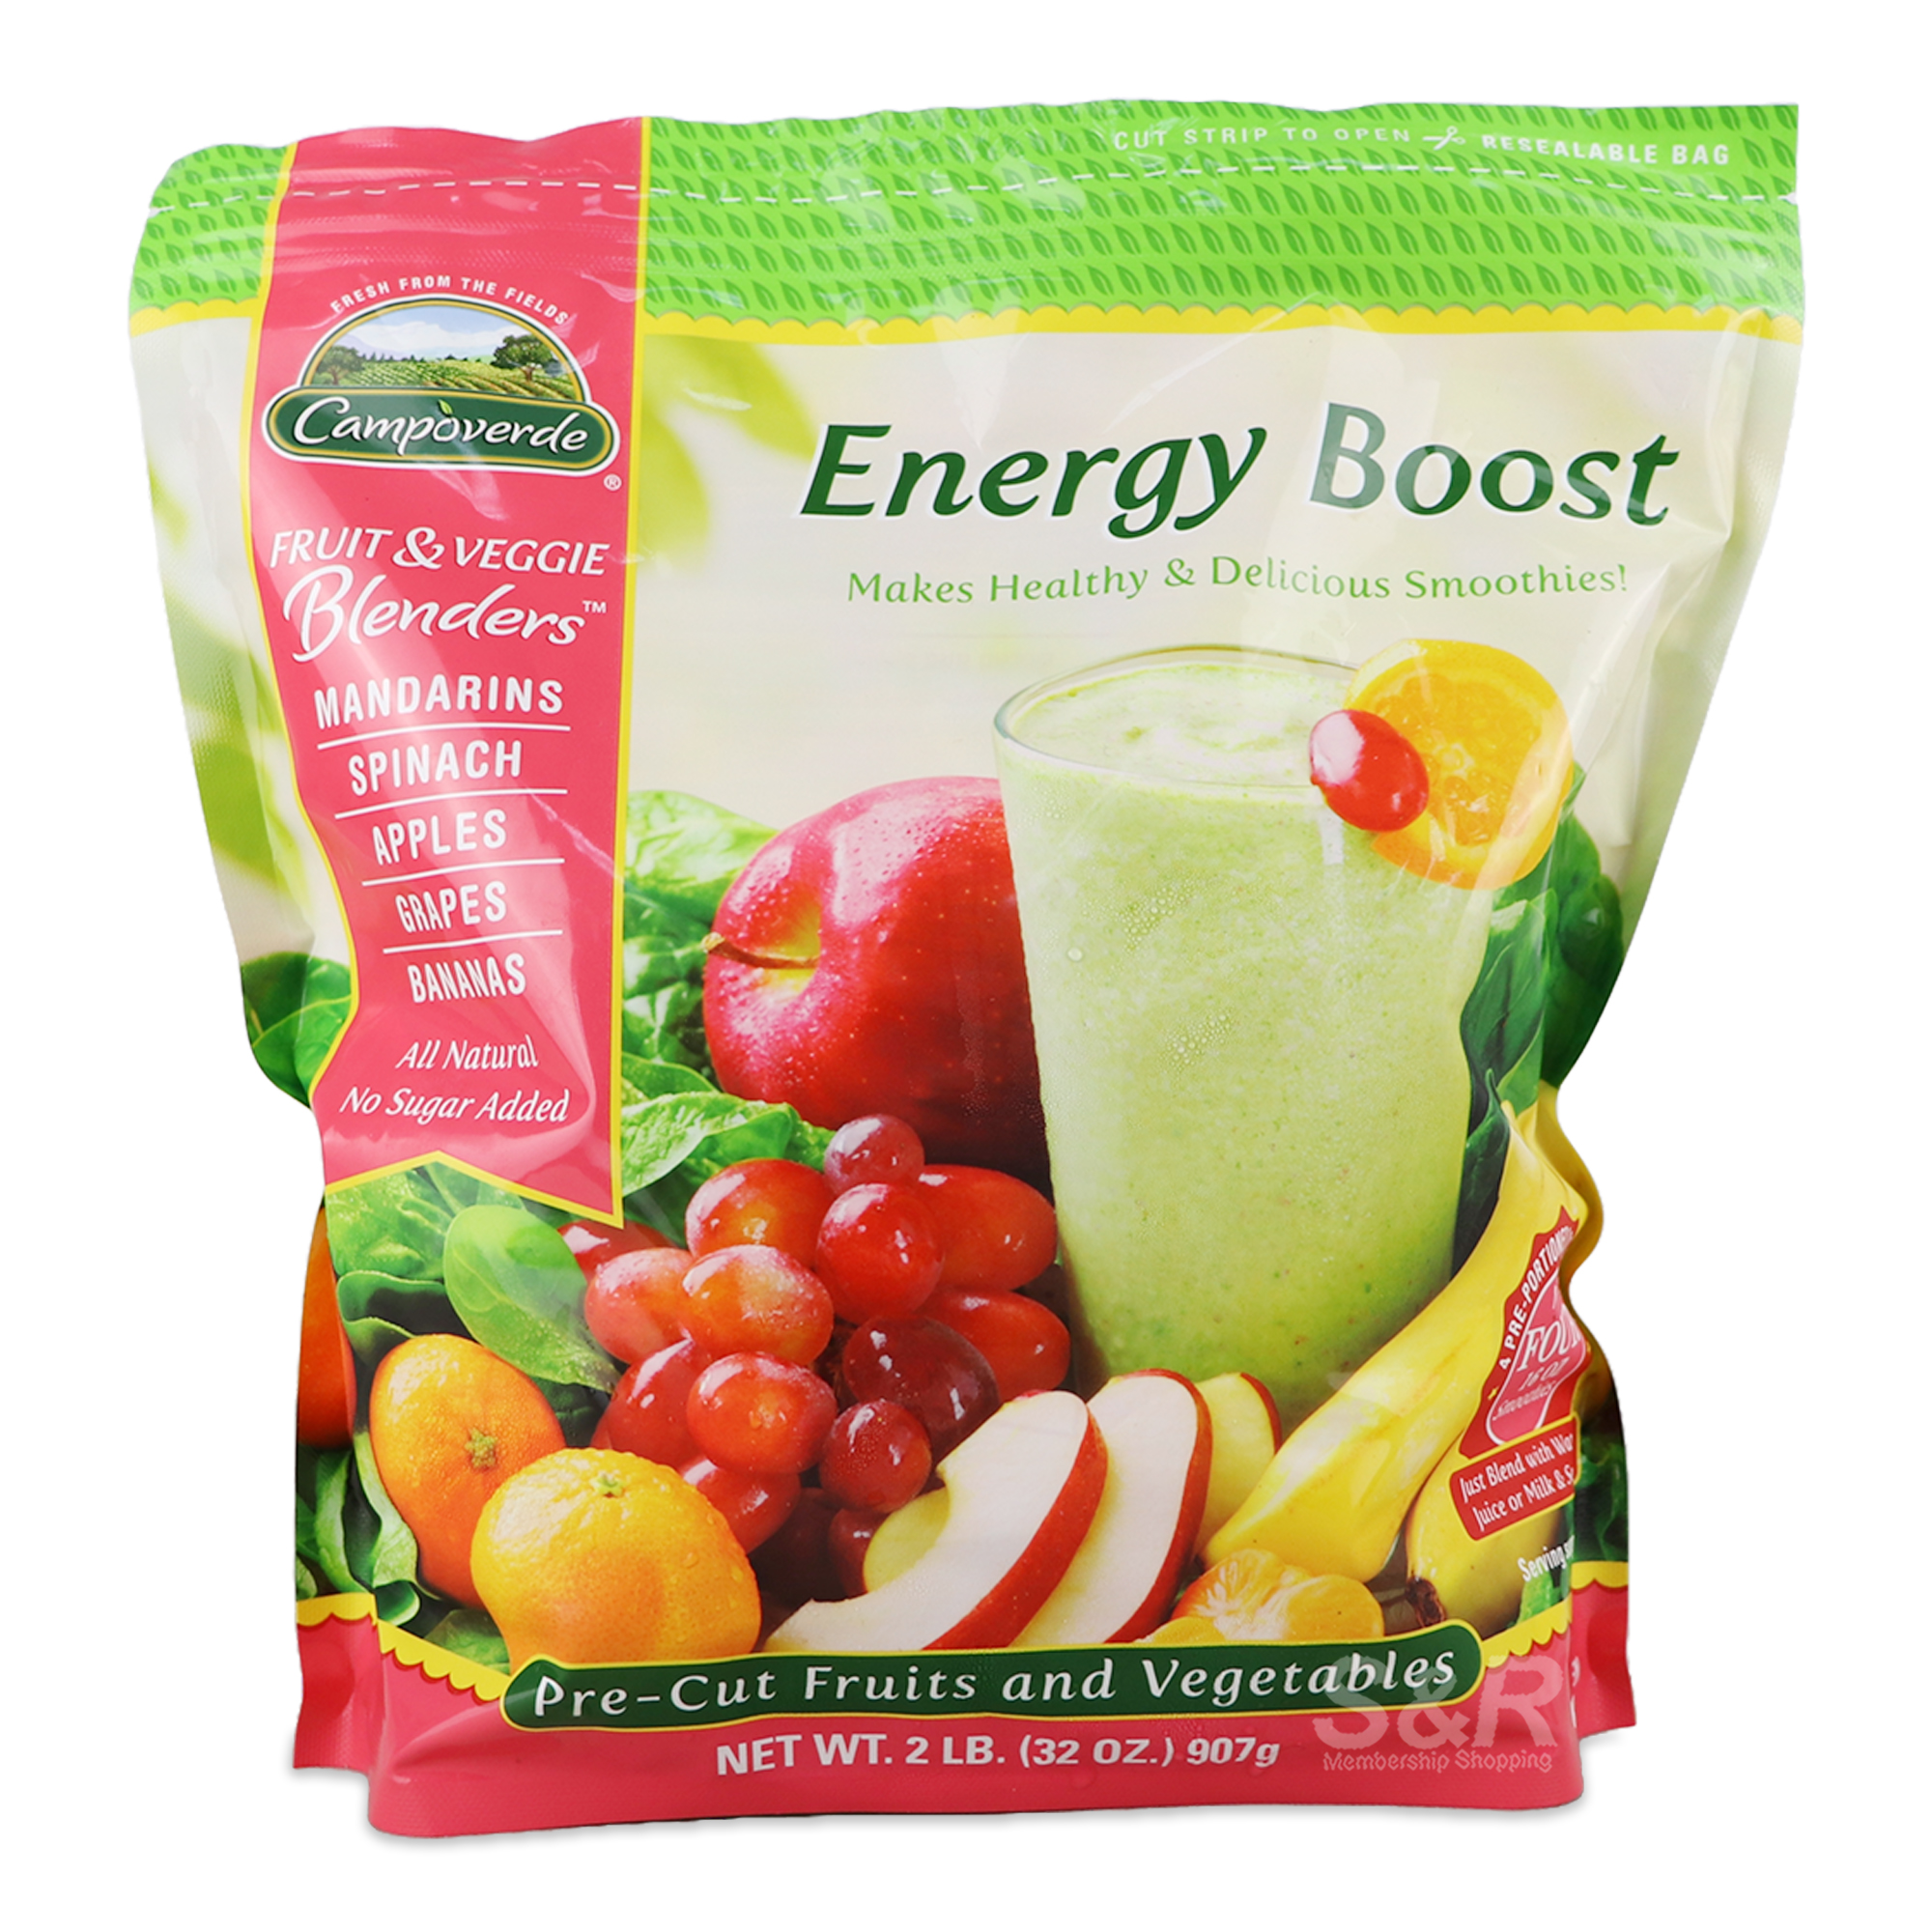 Campoverde Pre-Cut Fruits and Vegetables Energy Boost 907g